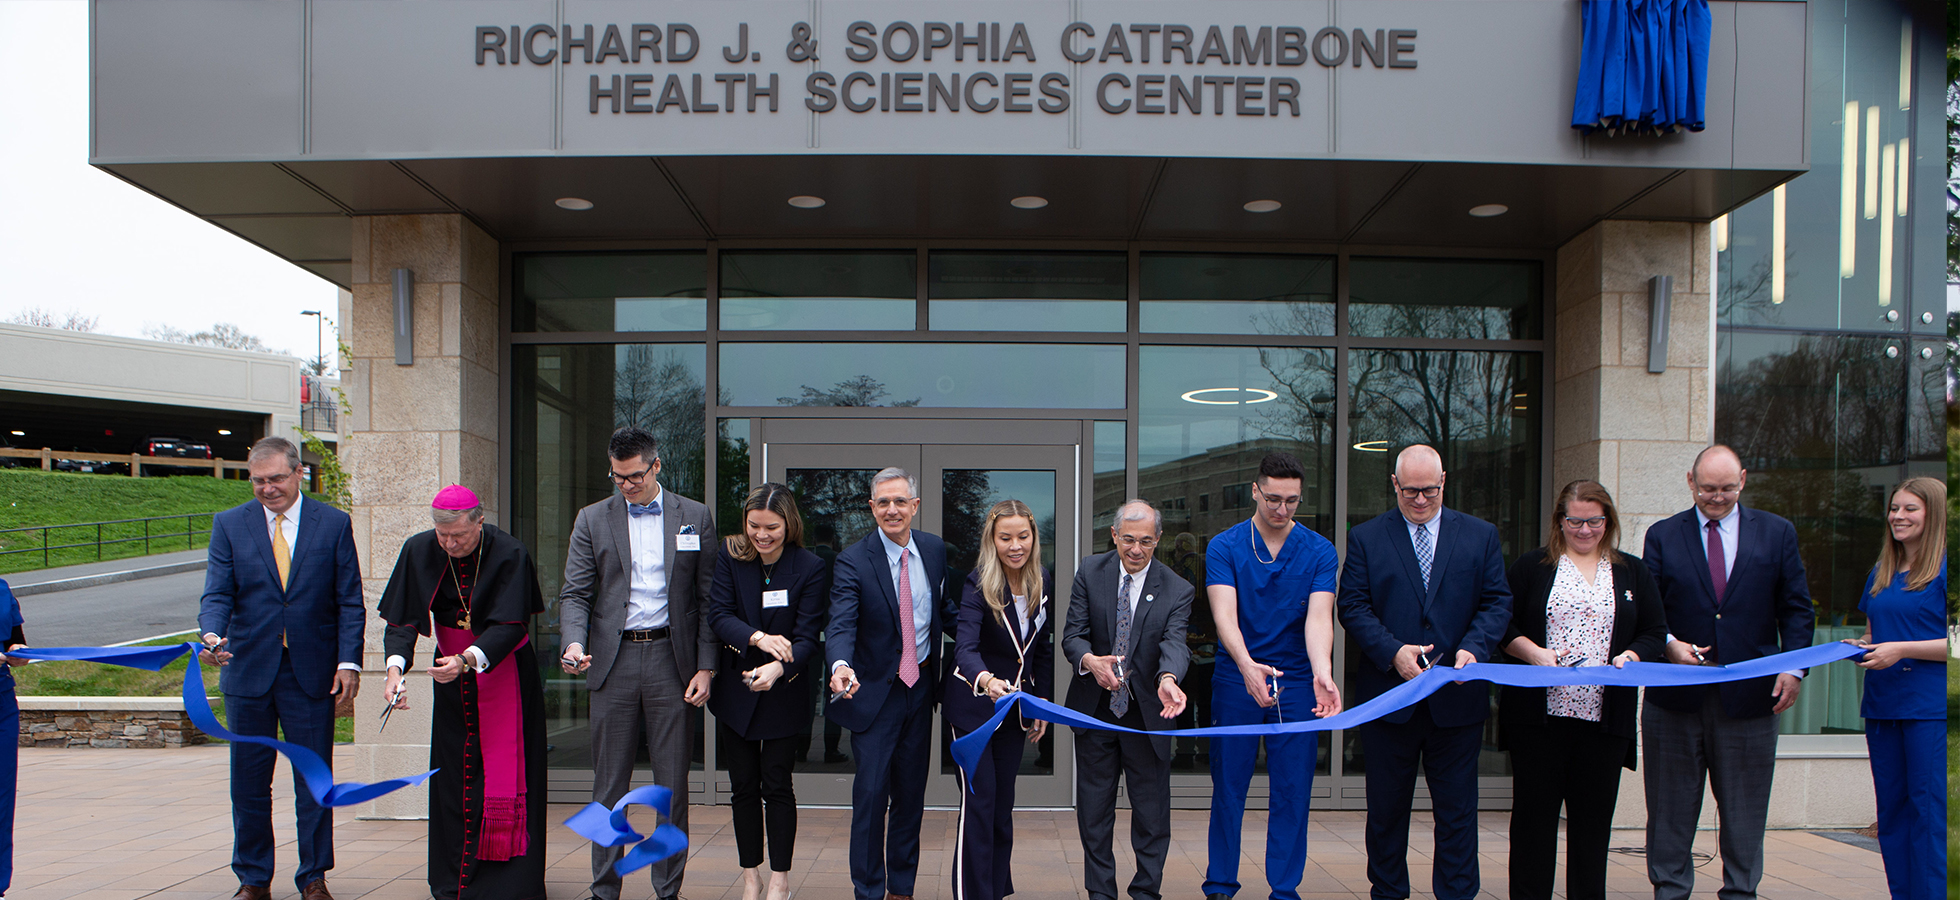 Assumption University leaders and members of the Catrambone family cut the ceremonial ribbon for the new Health Sciences Building. 